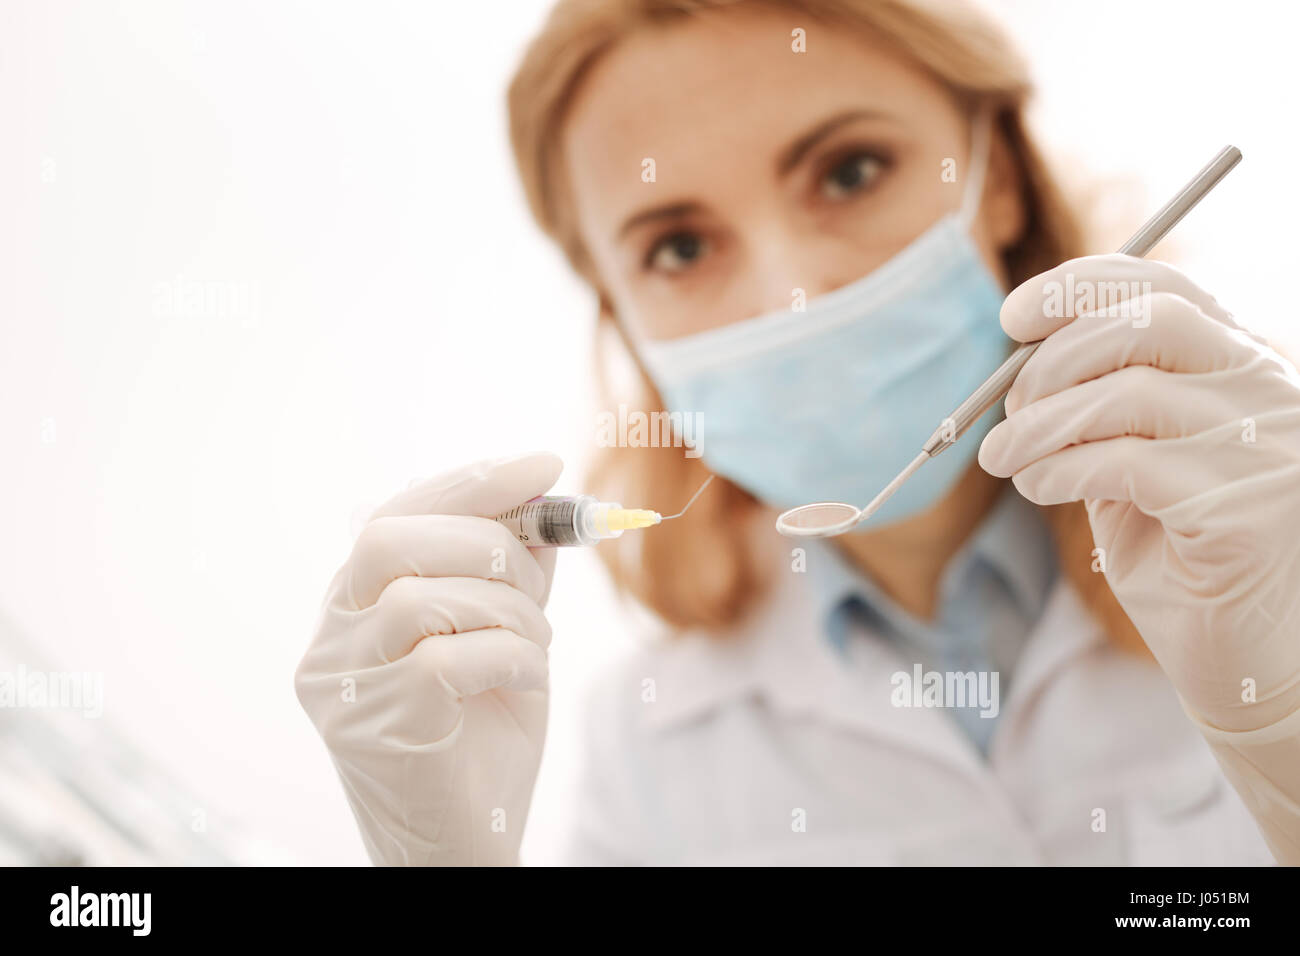 To kill the pain. Wonderful gentle distinguished dentist giving a pain reveling injection while running some procedures using sterile equipment Stock Photo